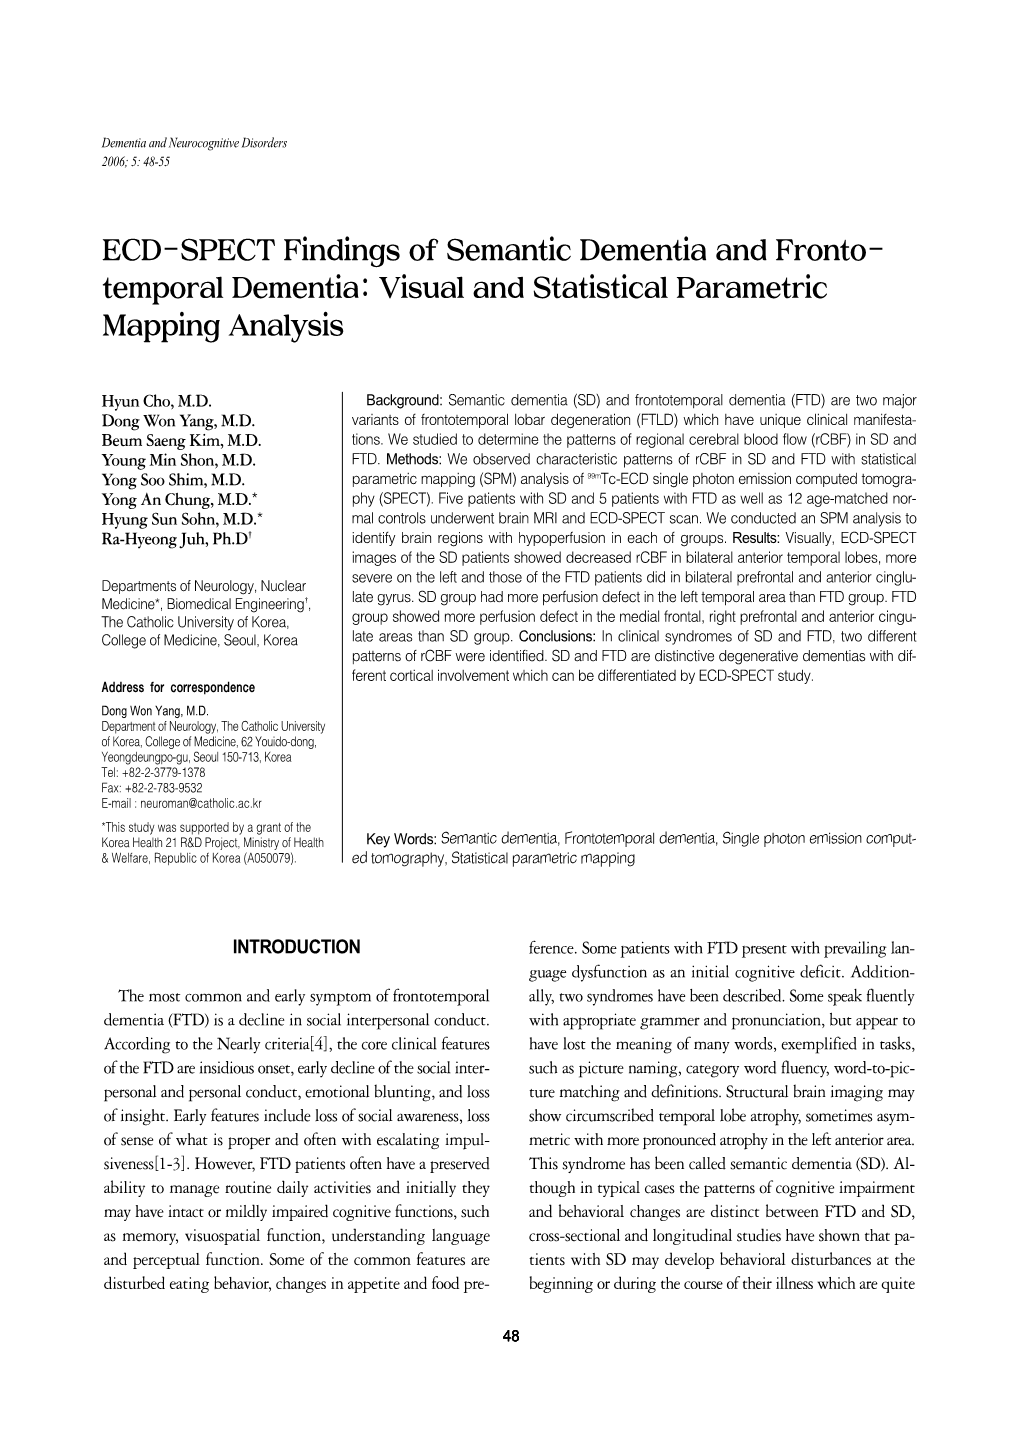 ECD-SPECT Findings of Semantic Dementia and Fronto- Temporal Dementia: Visual and Statistical Parametric Mapping Analysis